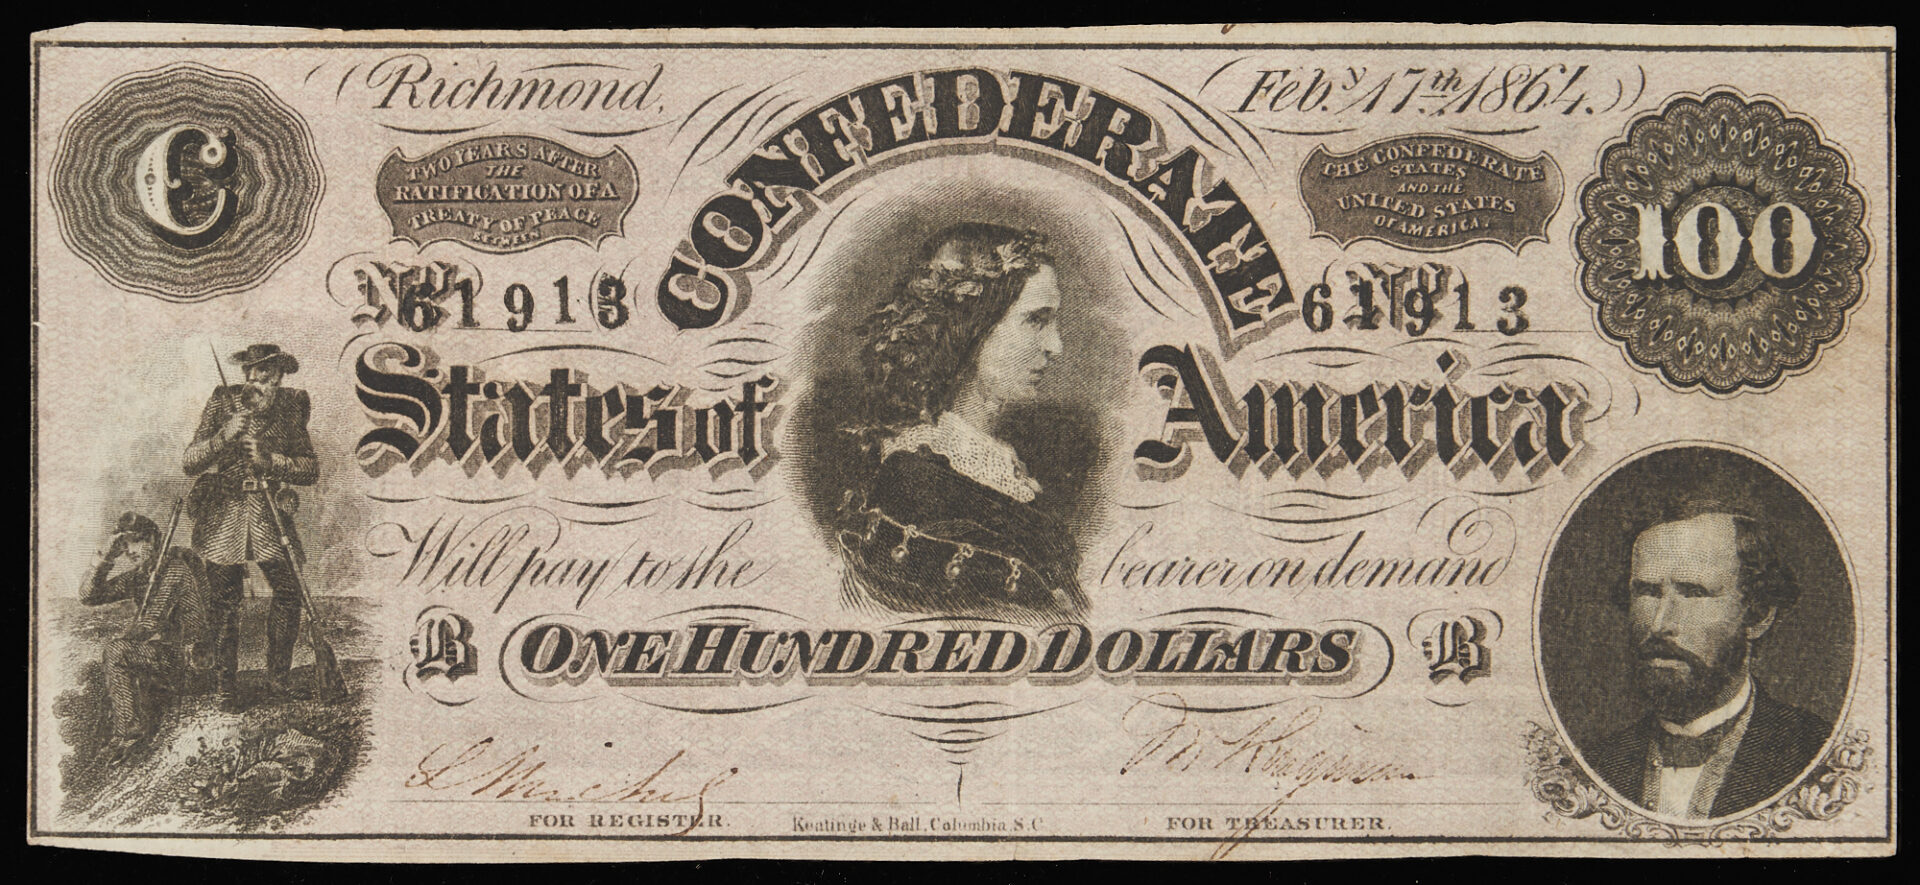 Lot 592: 3 Confederate States Obsolete Currency Notes, $500, $100 & $50